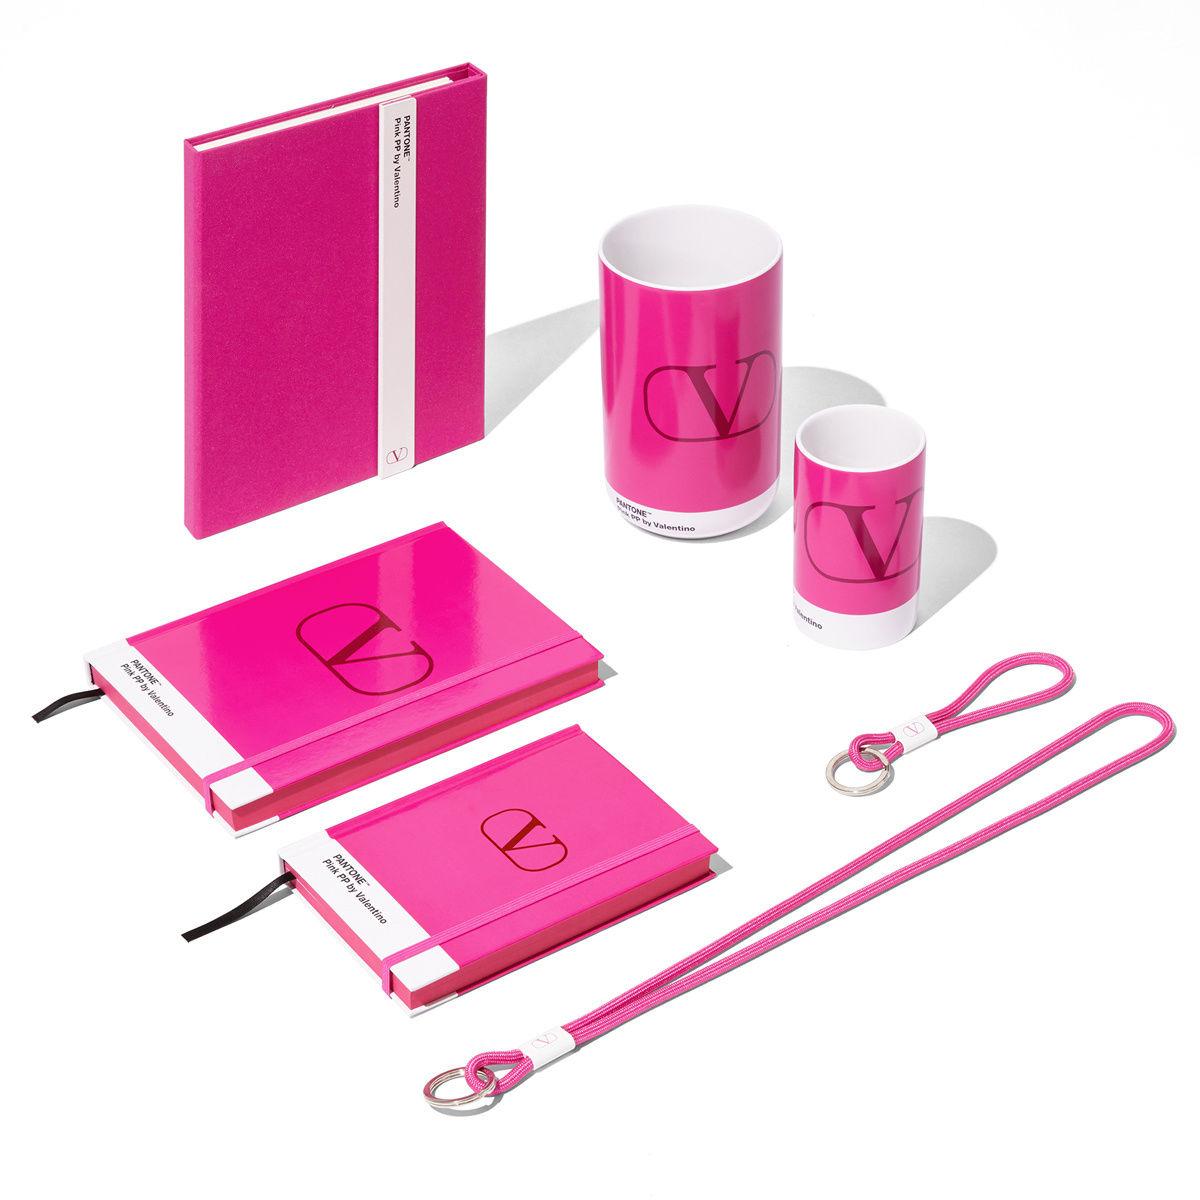 Valentino and Pantone releases limited-edition Pink PP household items